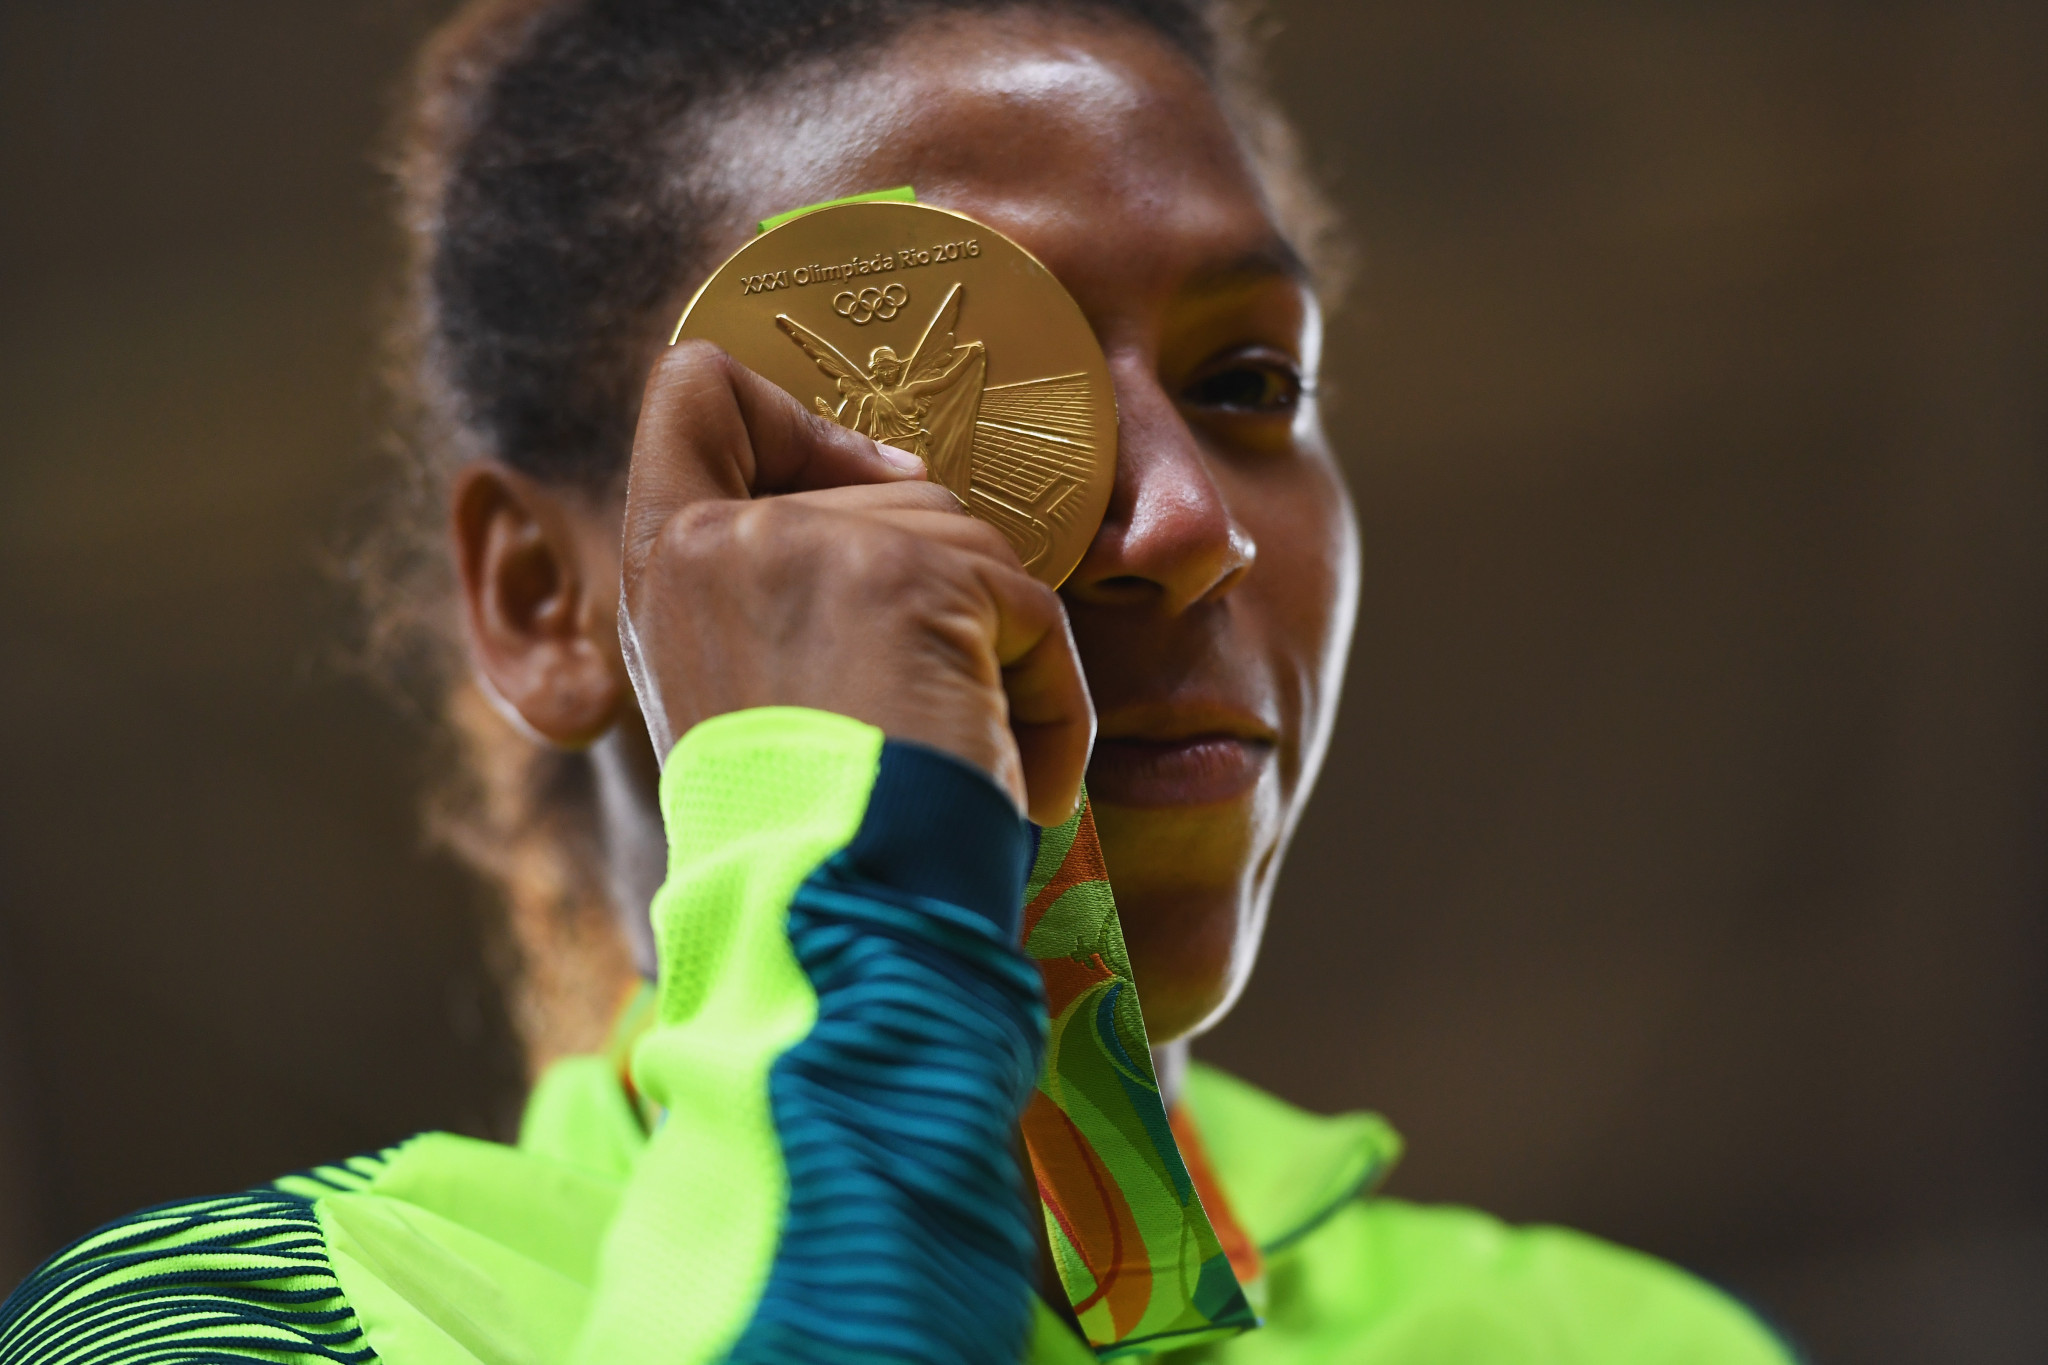 Silva's gold at Rio 2016 was a noteworthy moment for the host nation as she was the first Brazilian athlete to stand on top of the medal podium ©Getty Images